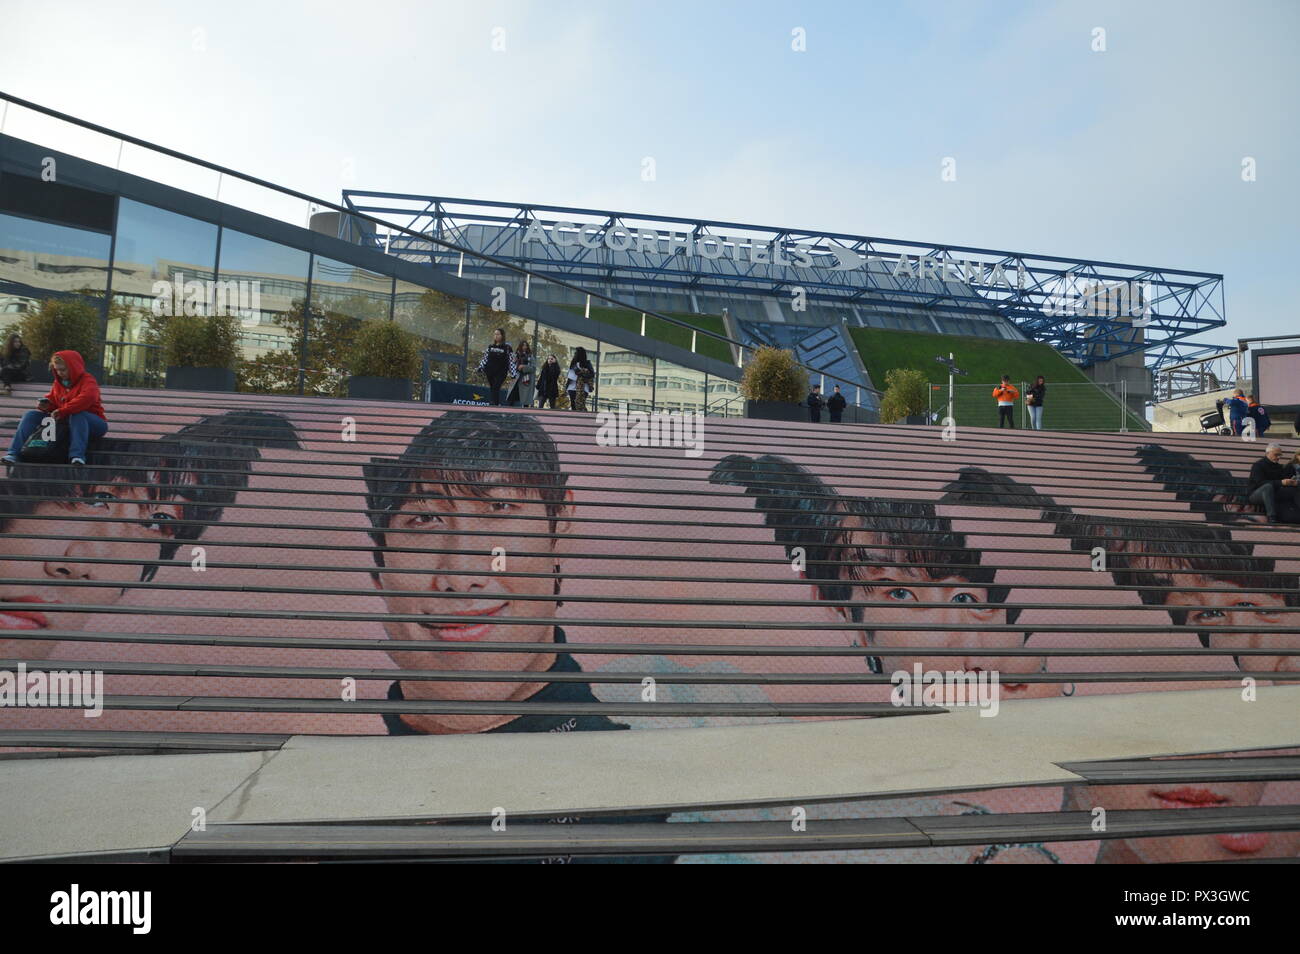 Paris, France. 19th October, 2018. Portraits of the BTS painted on stairs. Fans of kpop band BTS (Bangtan Boys or Bulletproof Boy Scouts)are sleeping outdoor waiting since the eve for the concert at Paris-Bercy (Accord Hotel Arena). 19 october 2018.  ALPHACIT NEWIM / Alamy Live News Stock Photo